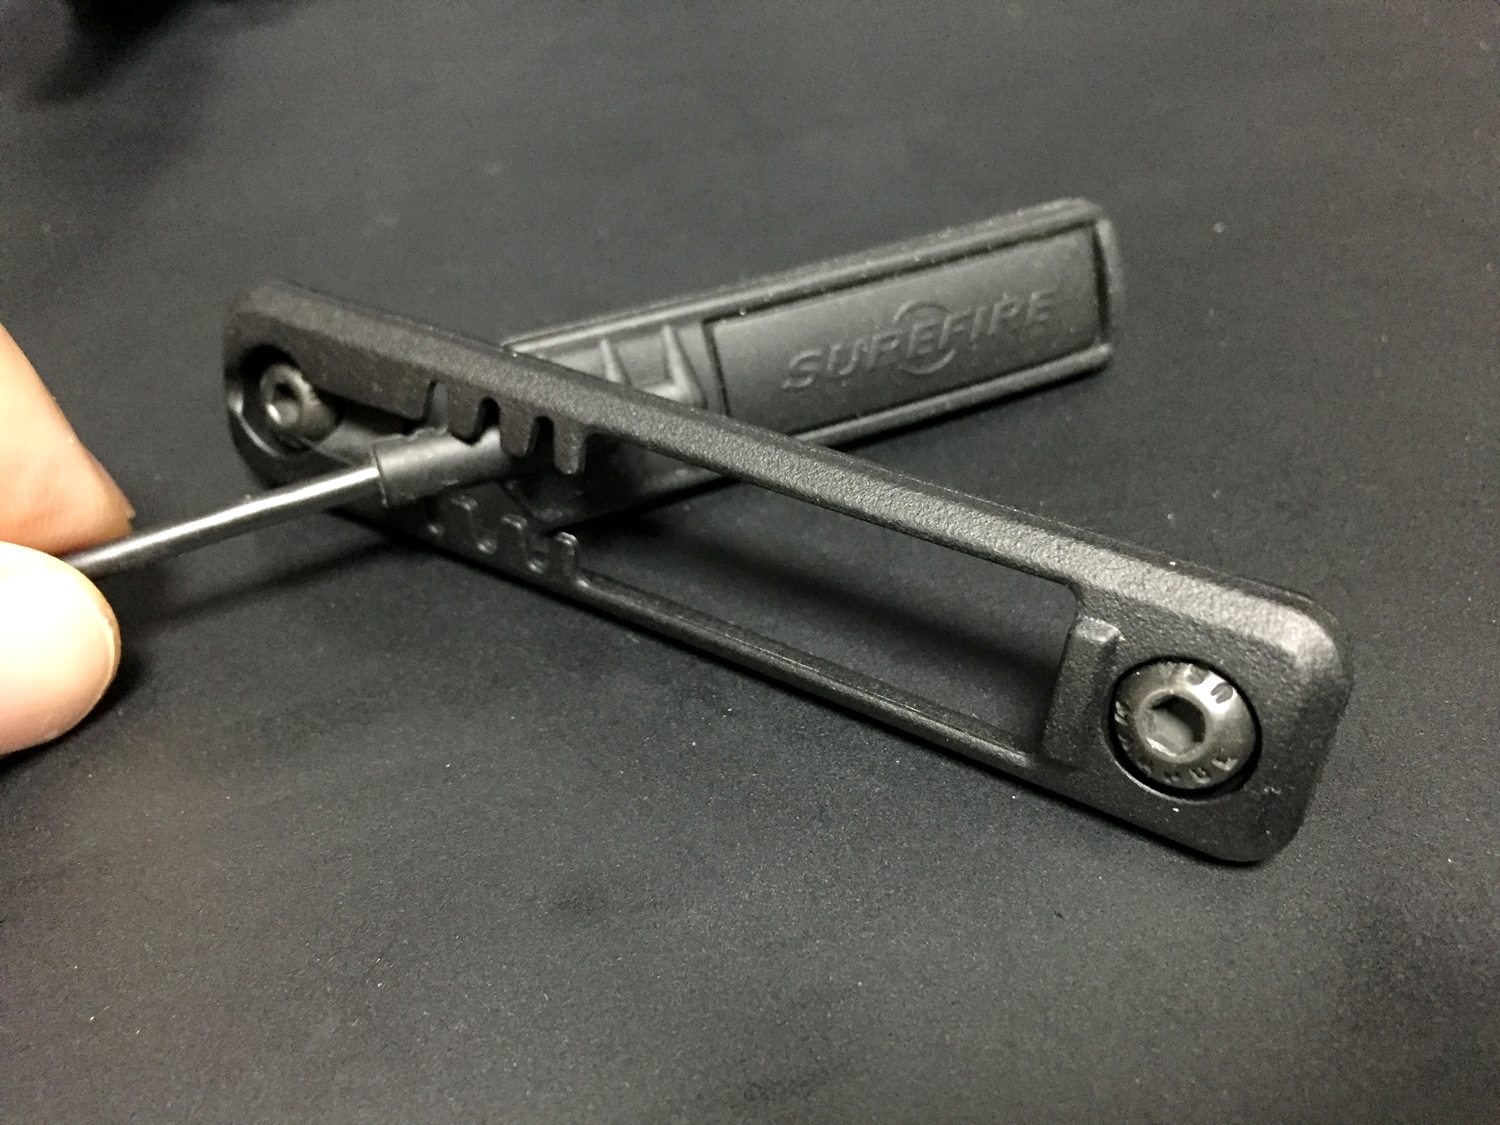 12 M-LOK MAGPUL Tape Switch Mounting Plate for Surefire ST Polymer MADE IN USA マグプル 実物 本家 テープ リモート スイッチ